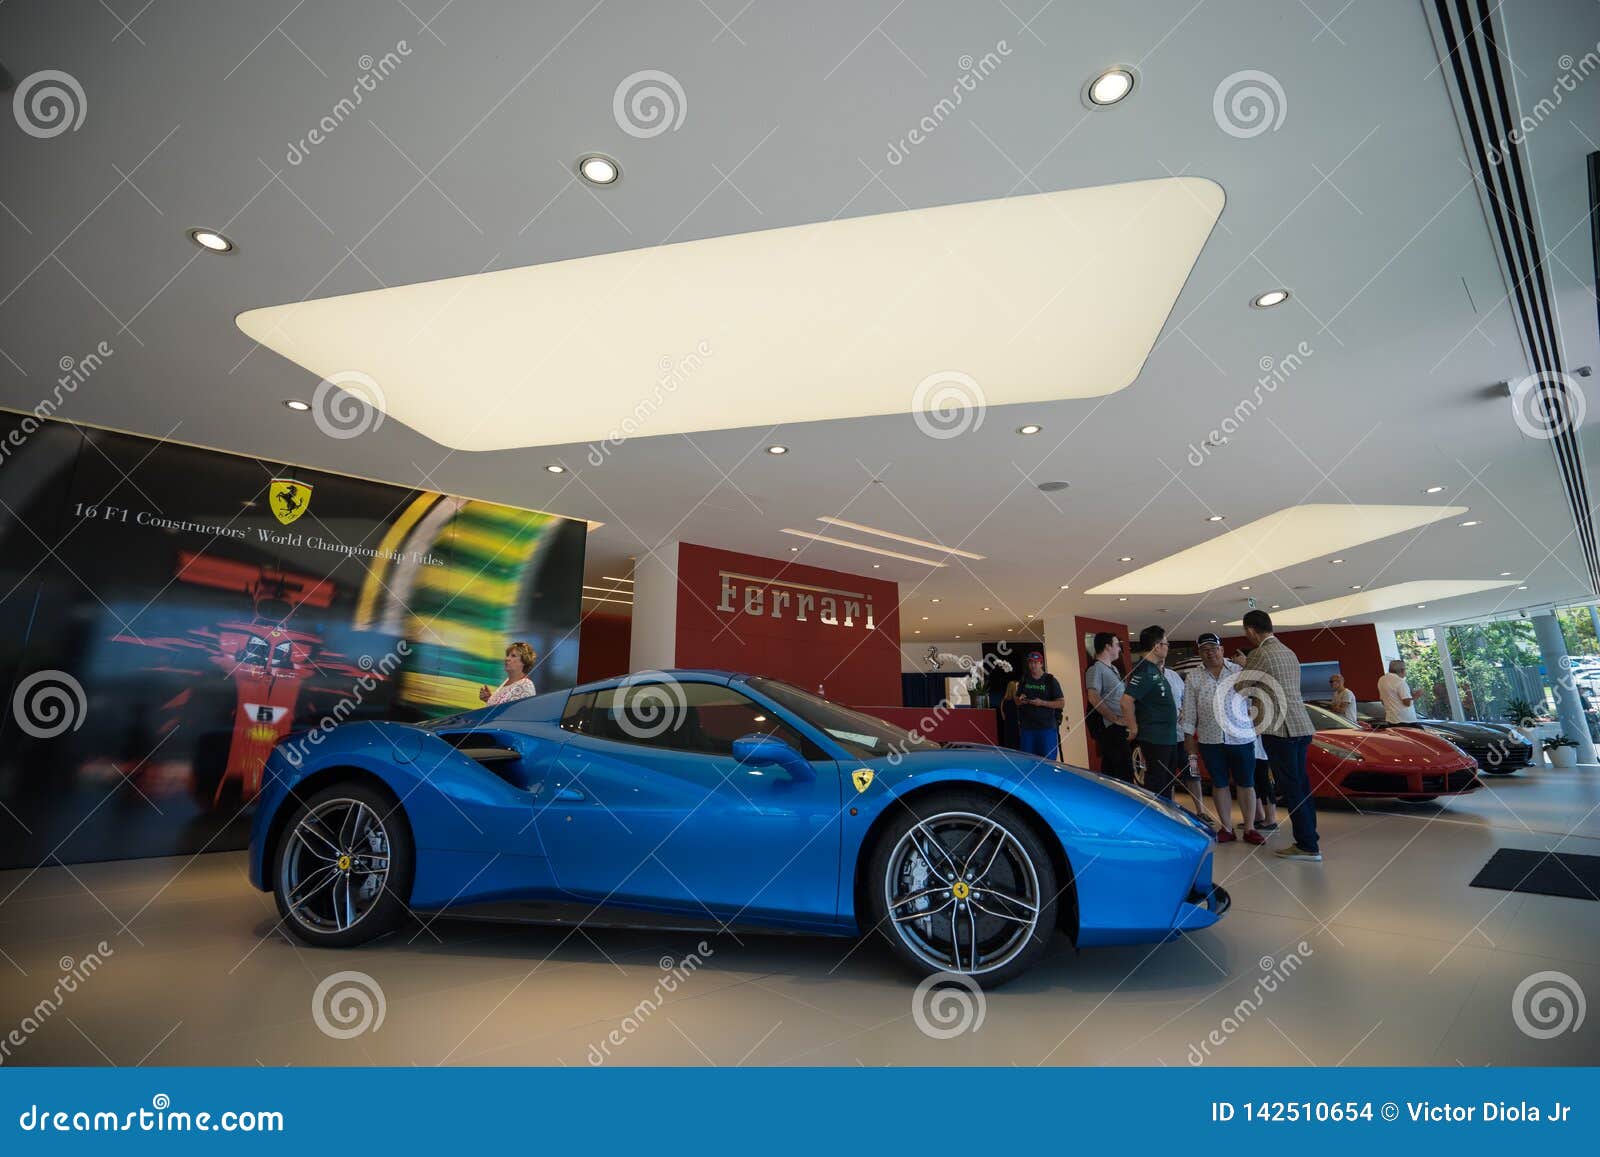 Ferrari Gold Coast Southport Australia Opening Day Editorial Stock Image - Image of cabriolet ...